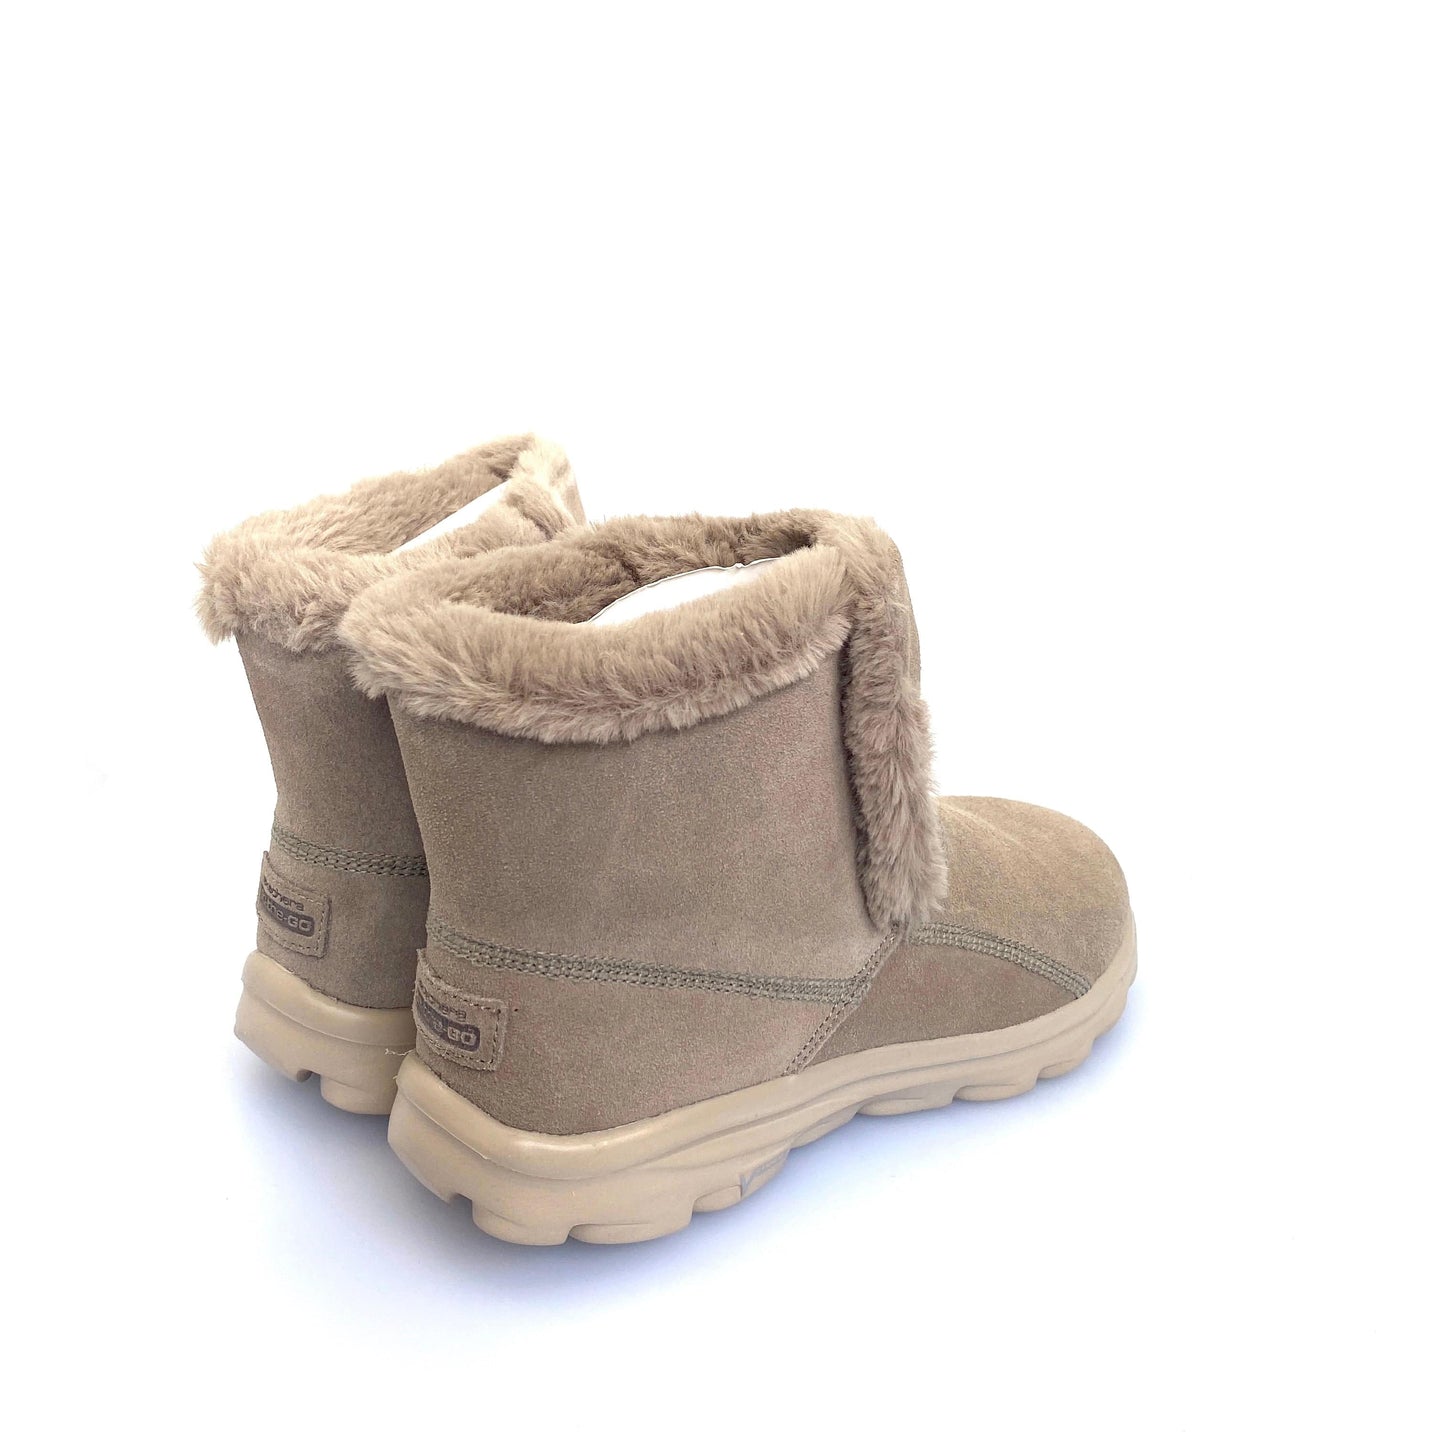 Skechers GOWalk Suede Faux Fur Boots w/ Goga Mat Dazzling Taupe (6.5M, Taupe Gray) NEW